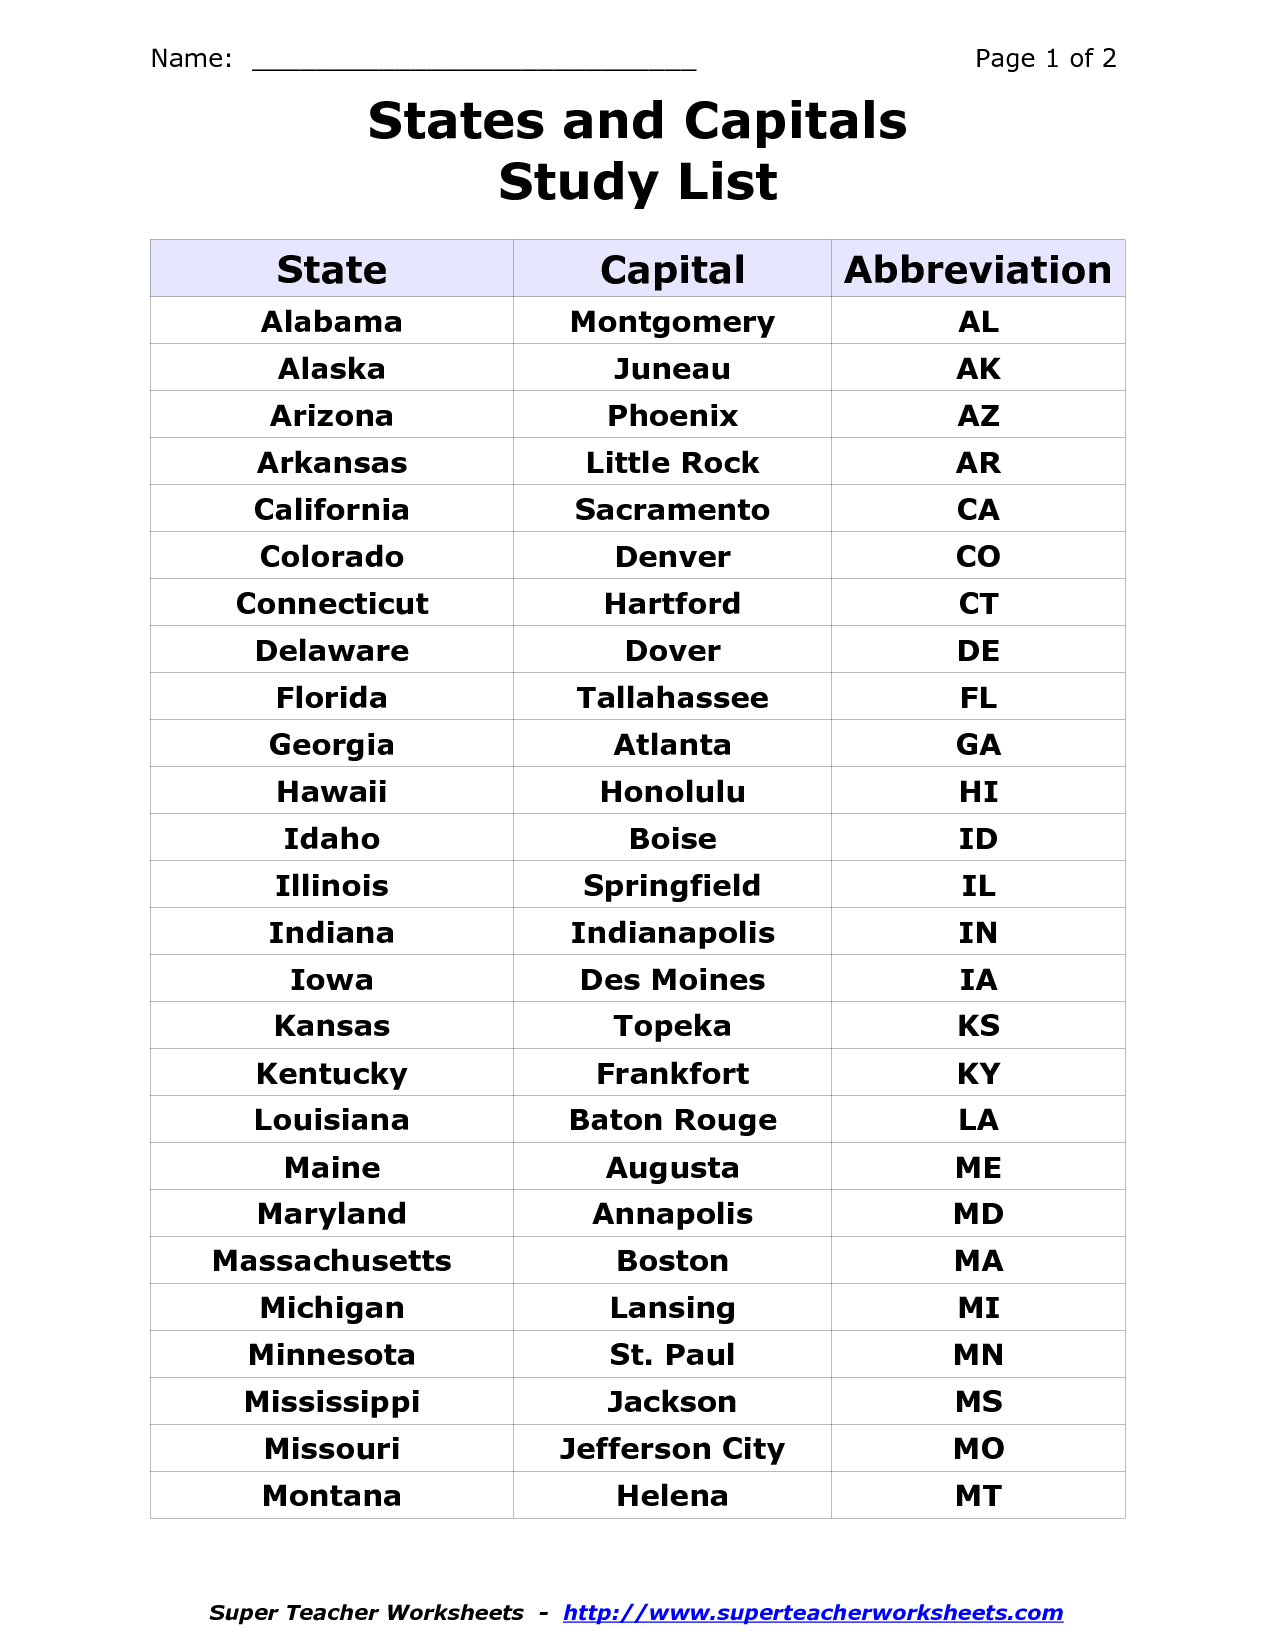 7-best-images-of-states-capitals-list-printable-50-states-capitals-list-printable-states-and